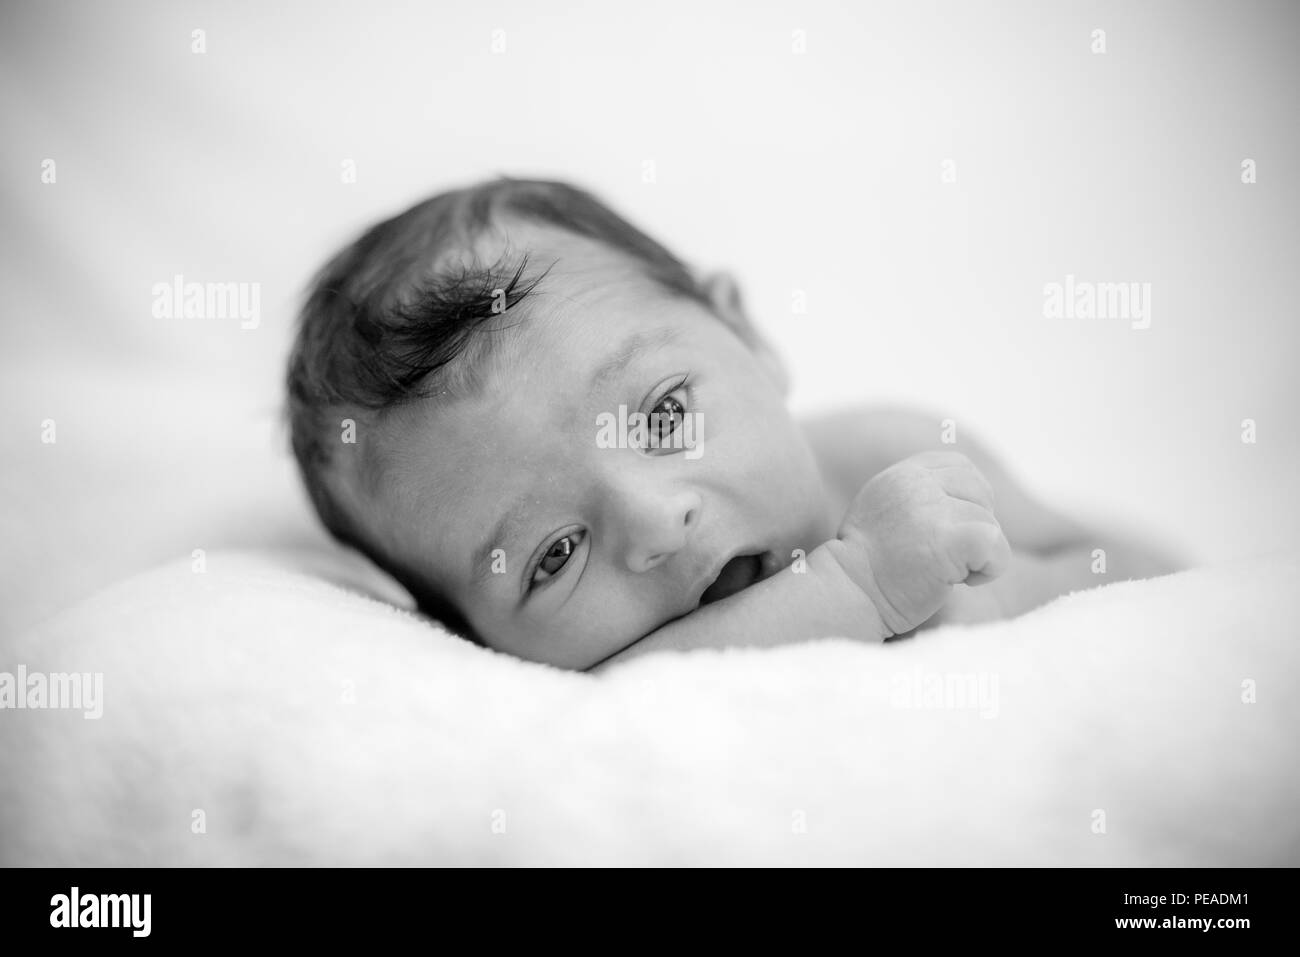 Cute newborn baby on a blanket - happy family moments concept Stock Photo